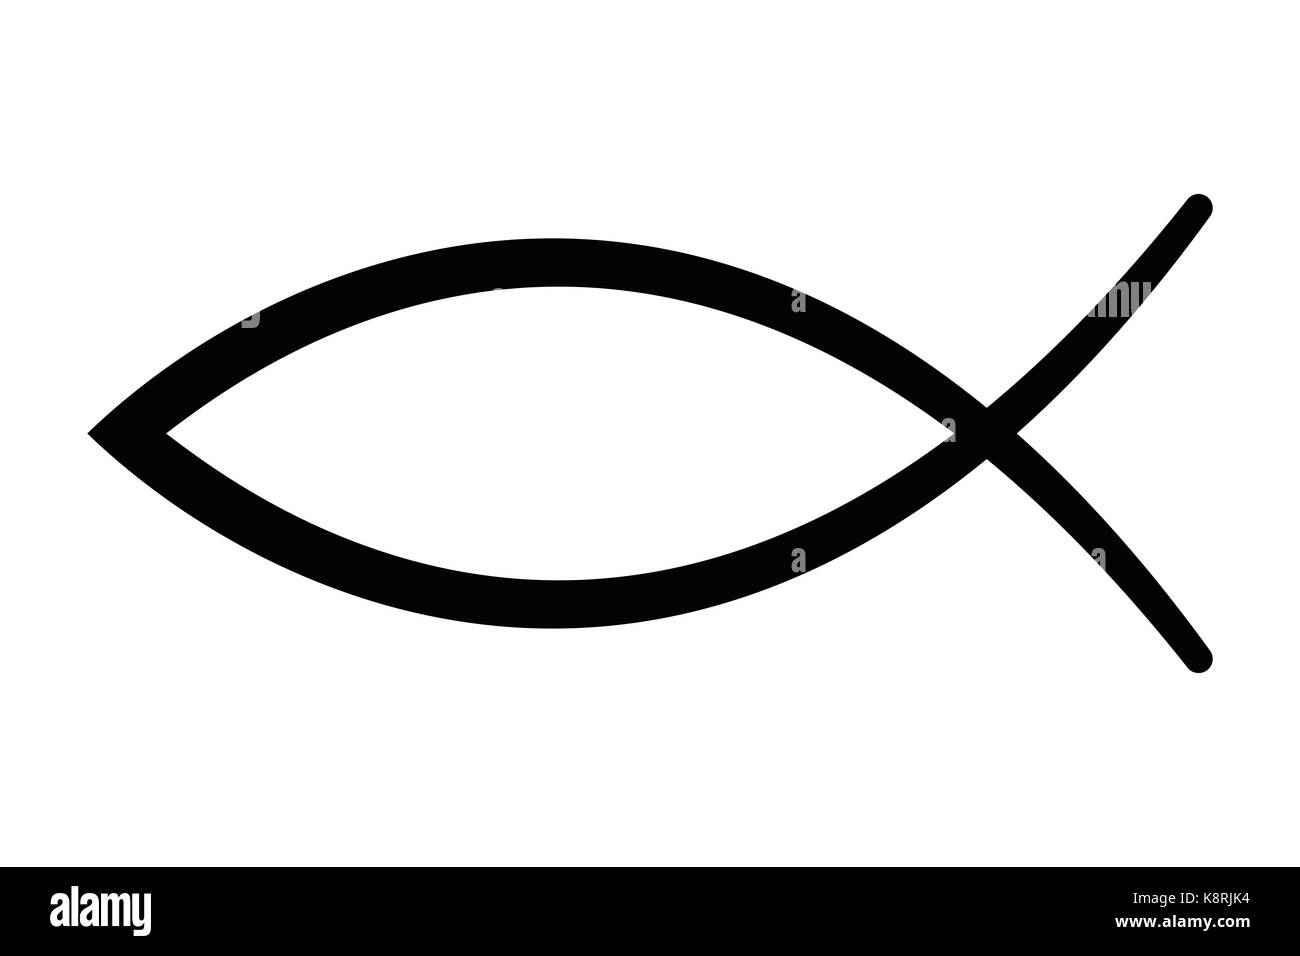 Sign of the fish, a symbol of Christian art, also known as Jesus fish. Symbol consisting of two intersecting arcs. Also called ichthys or ichthus. Stock Photo